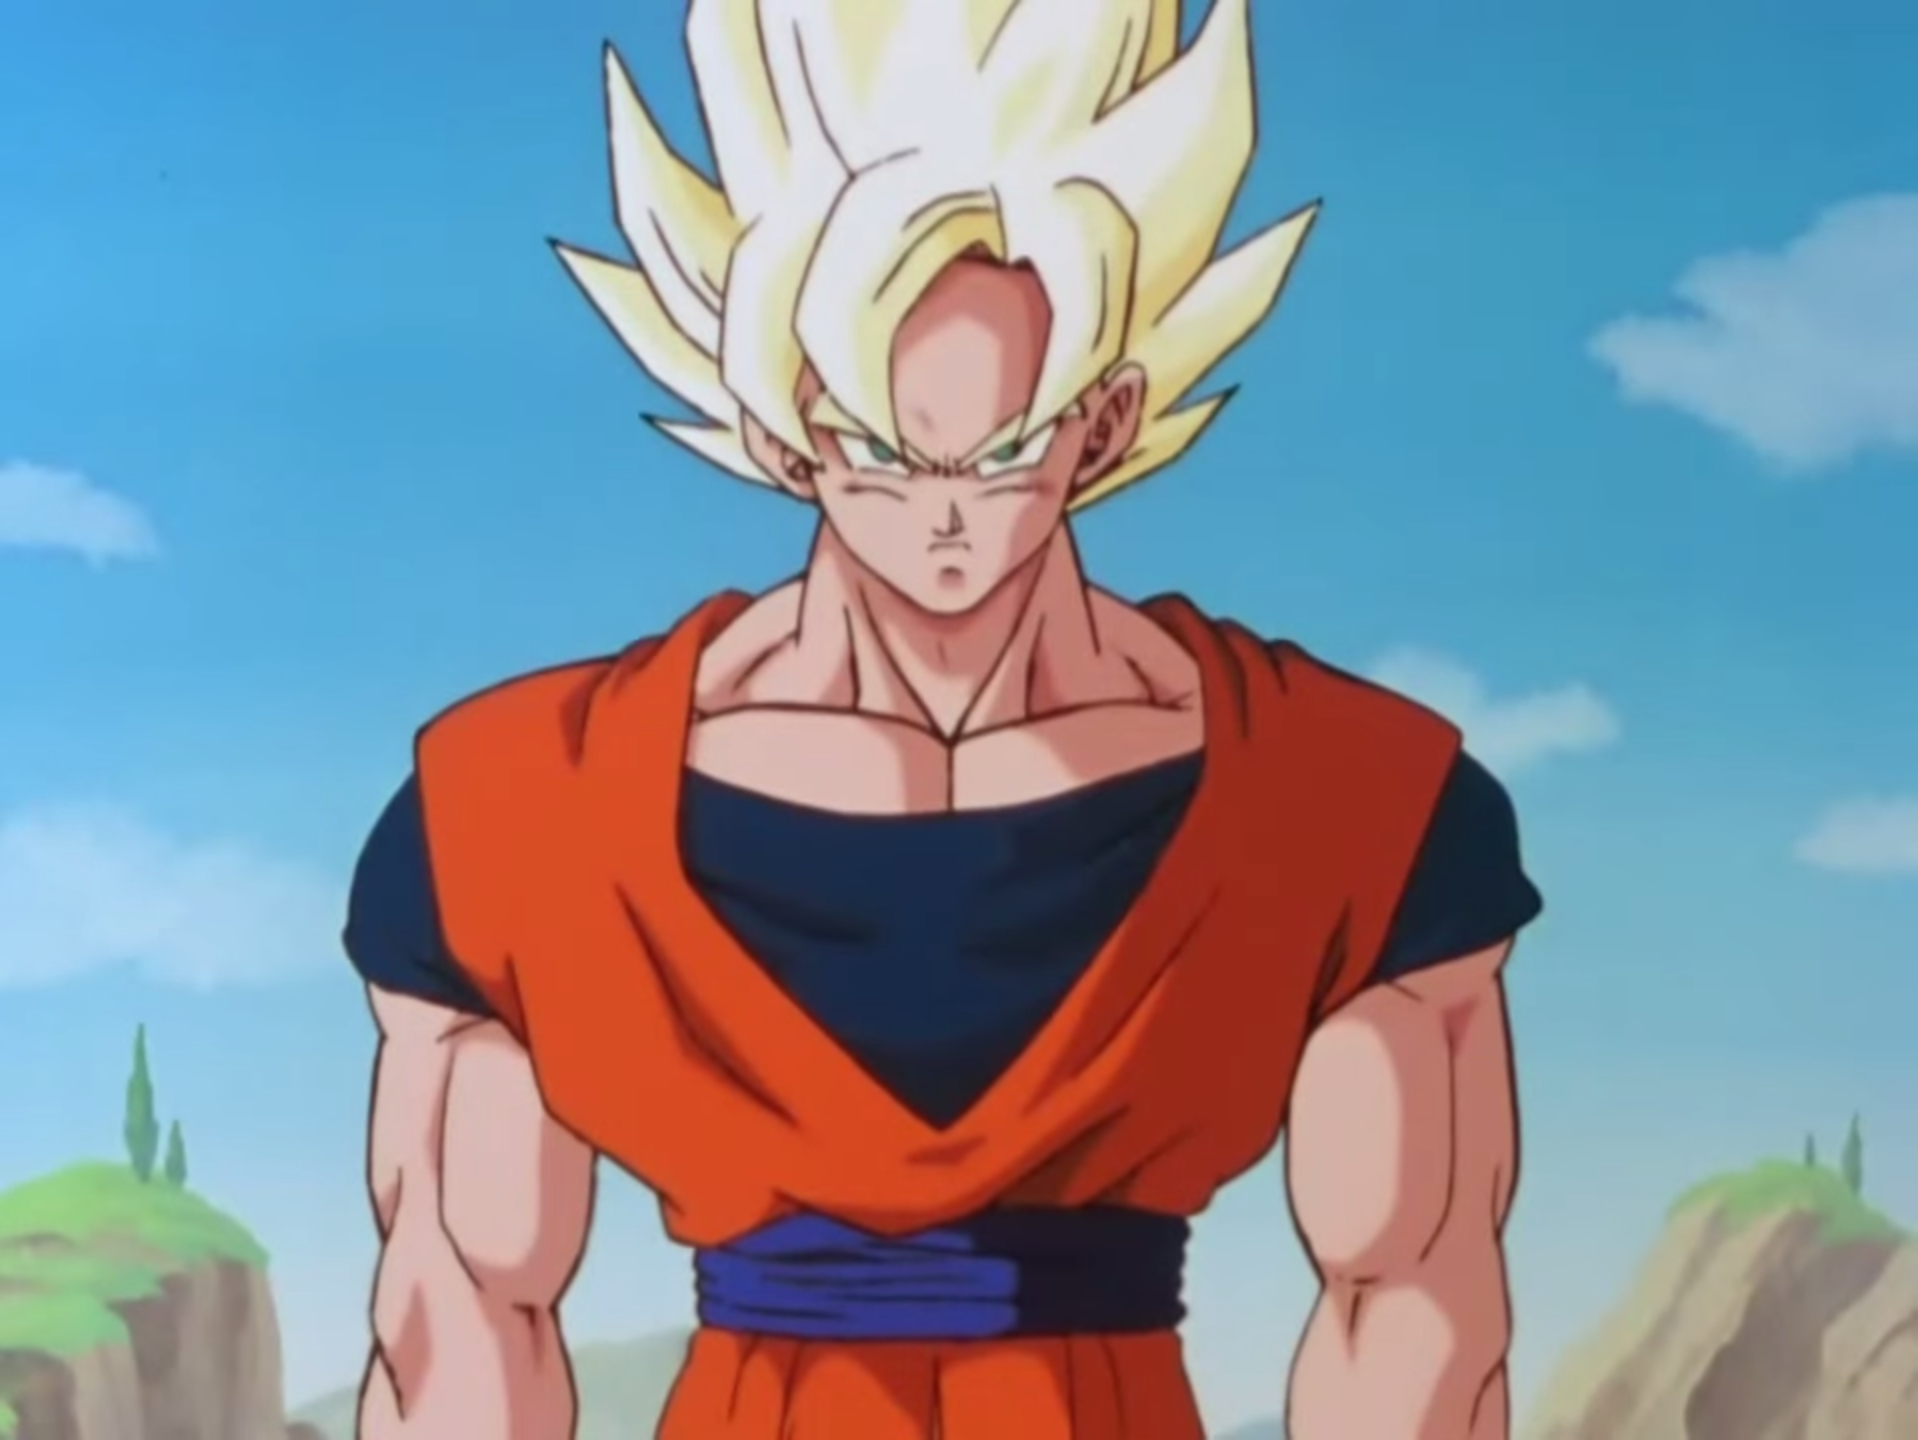 What is the difference between Super Saiyan 1 Goku and Super